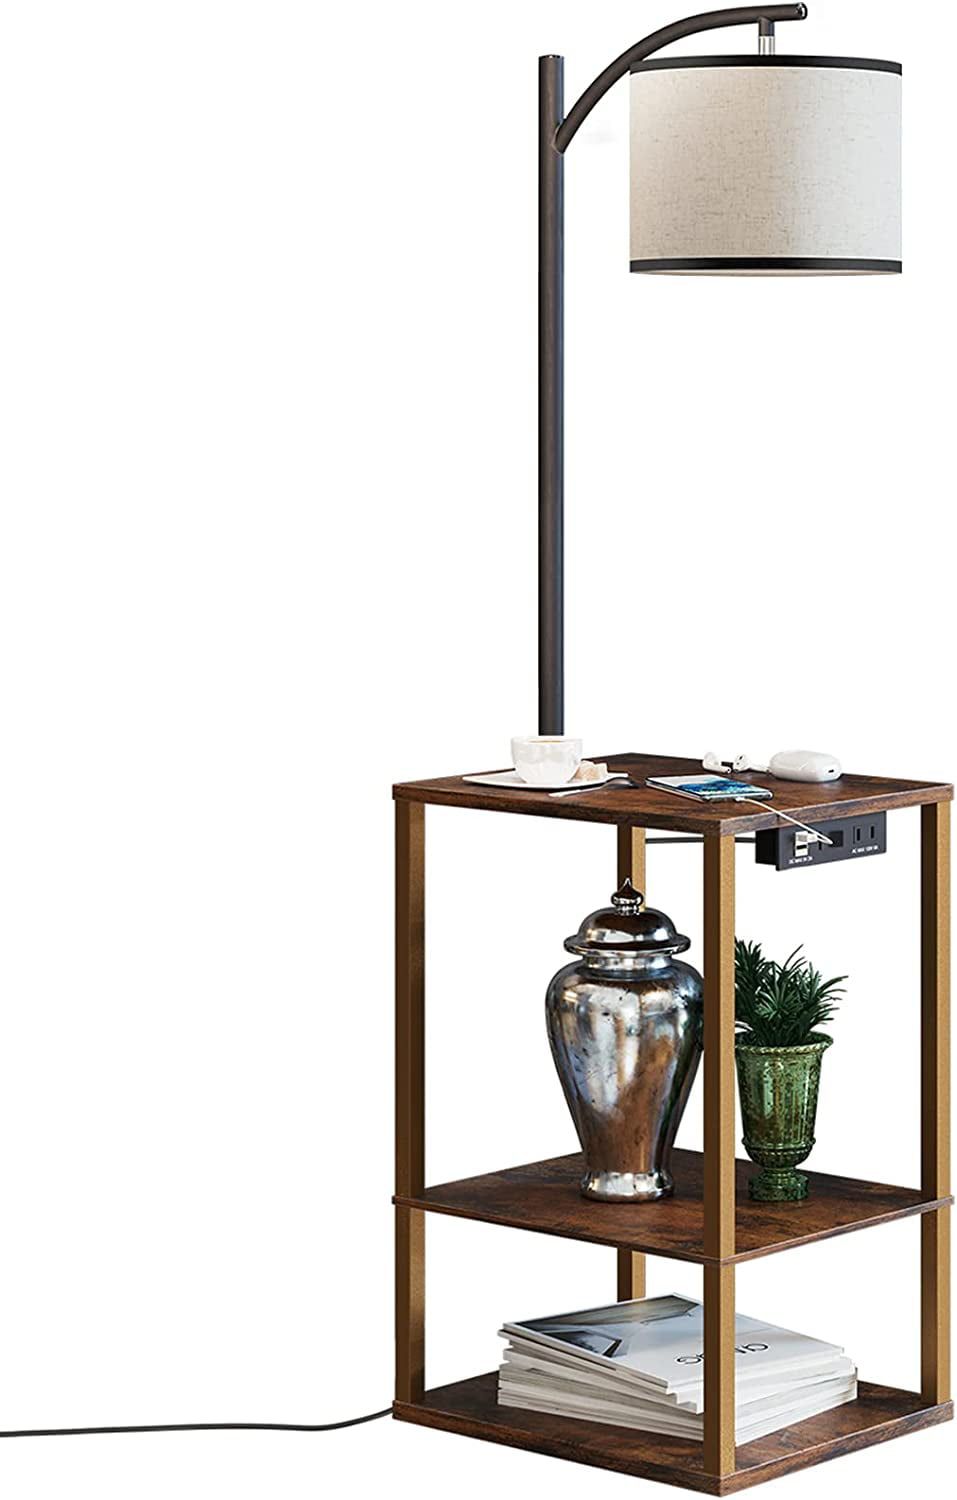 Sunmory Floor Lamp With Table, Lamps For Living Room With Usb Port,  Attached End Table With Shelves, Brown – Walmart Within Brown Floor Lamps (Photo 12 of 15)